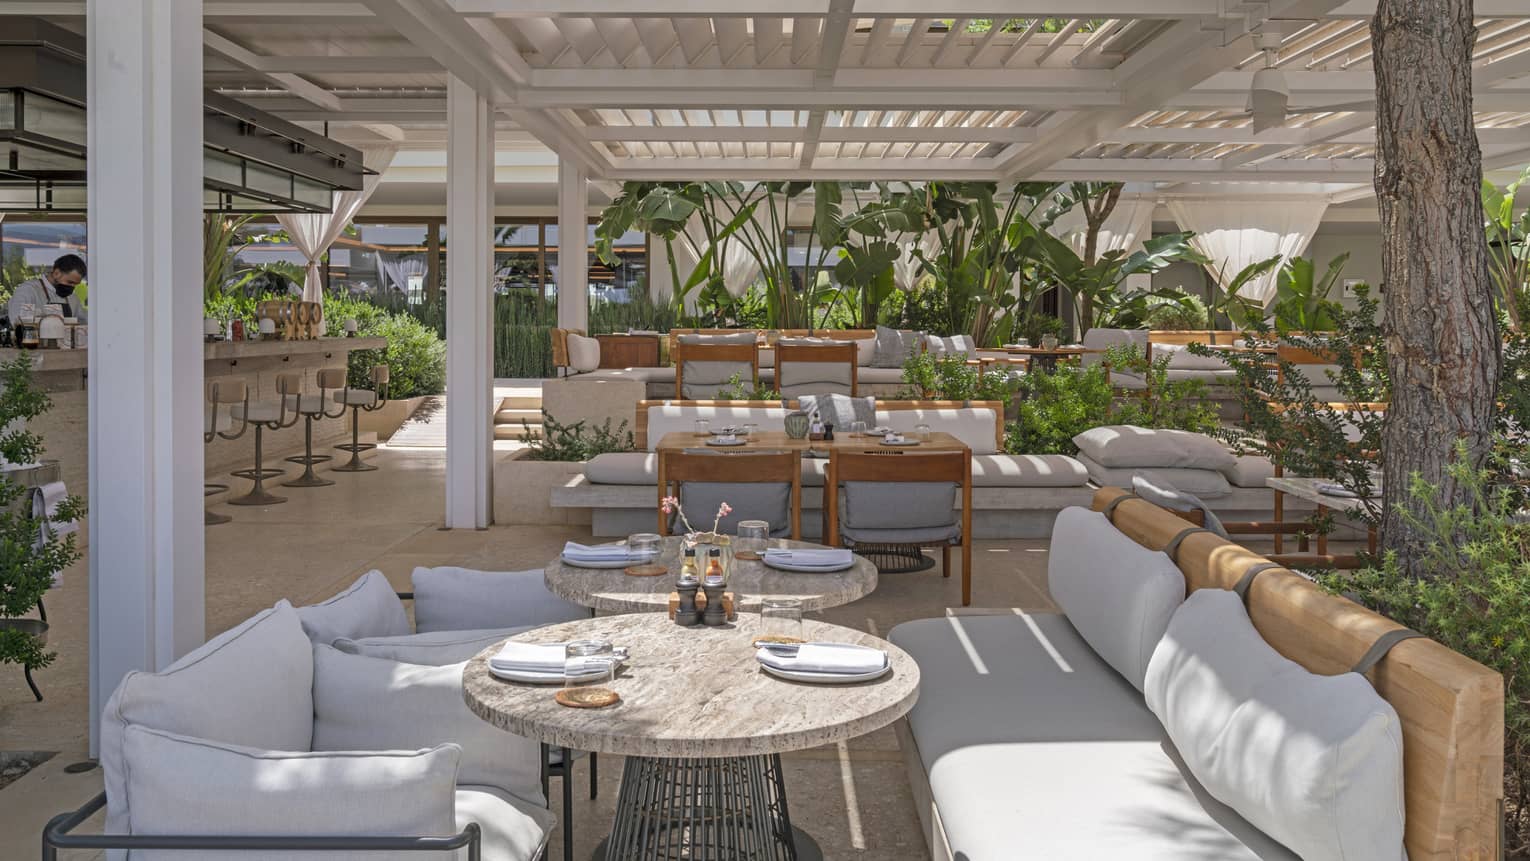 Helios restaurant's terrace with pergola, casual banquette seating, lush greenery and spacious bar